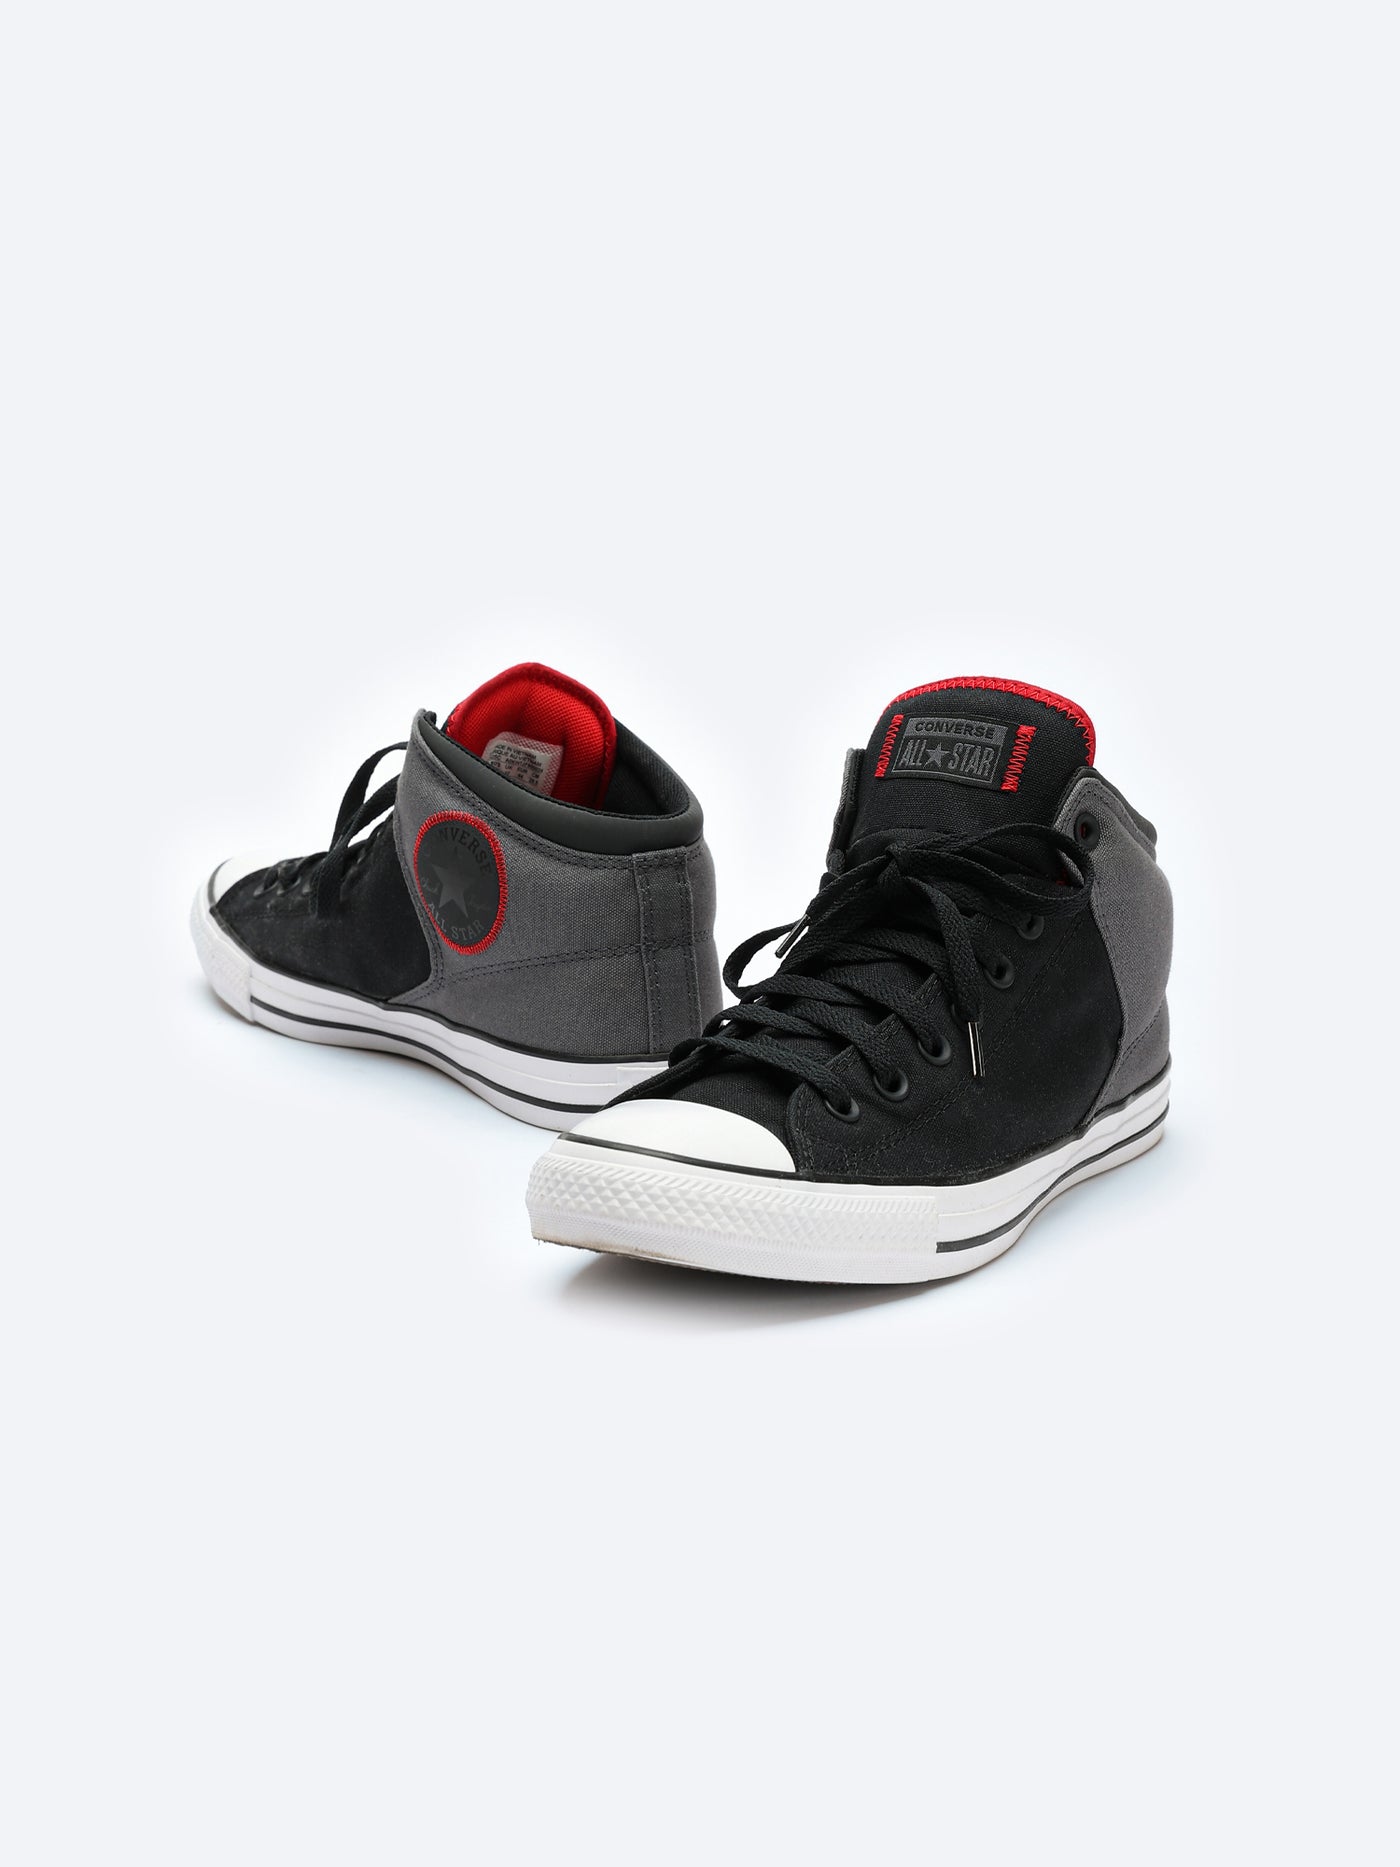 Unisex Sneakers - "All Star" - High Top